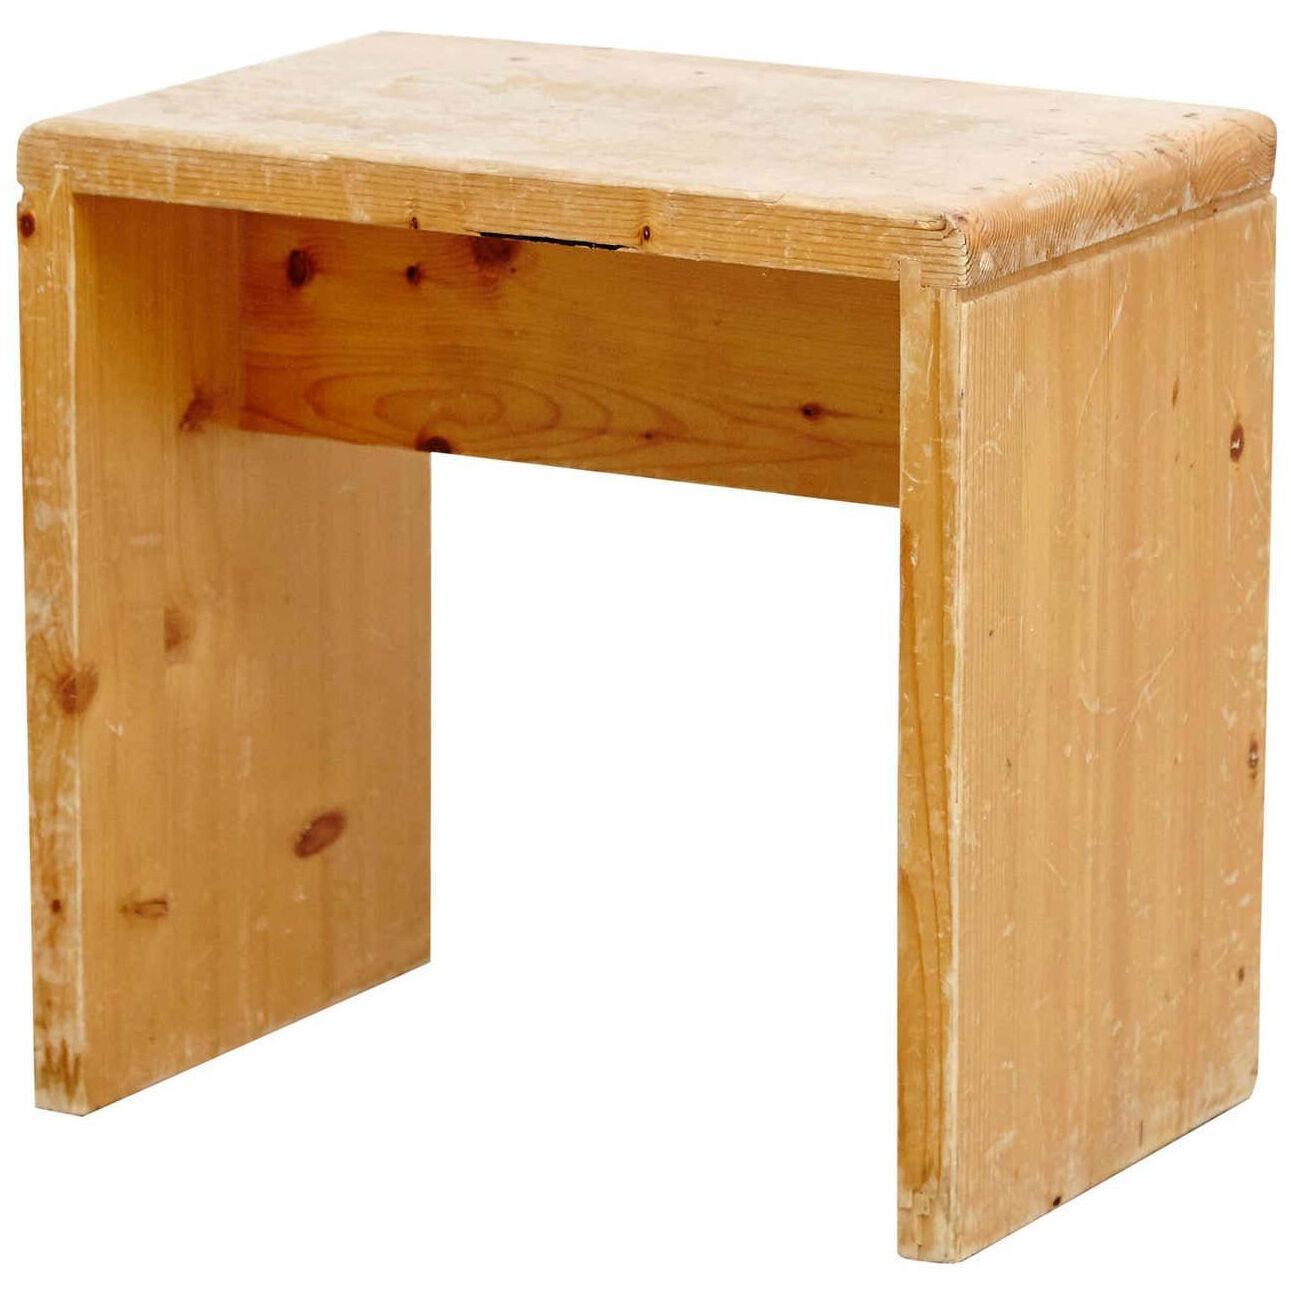 Charlotte Perriand Mid-Century Modern Pine Wood Stool for Les Arcs